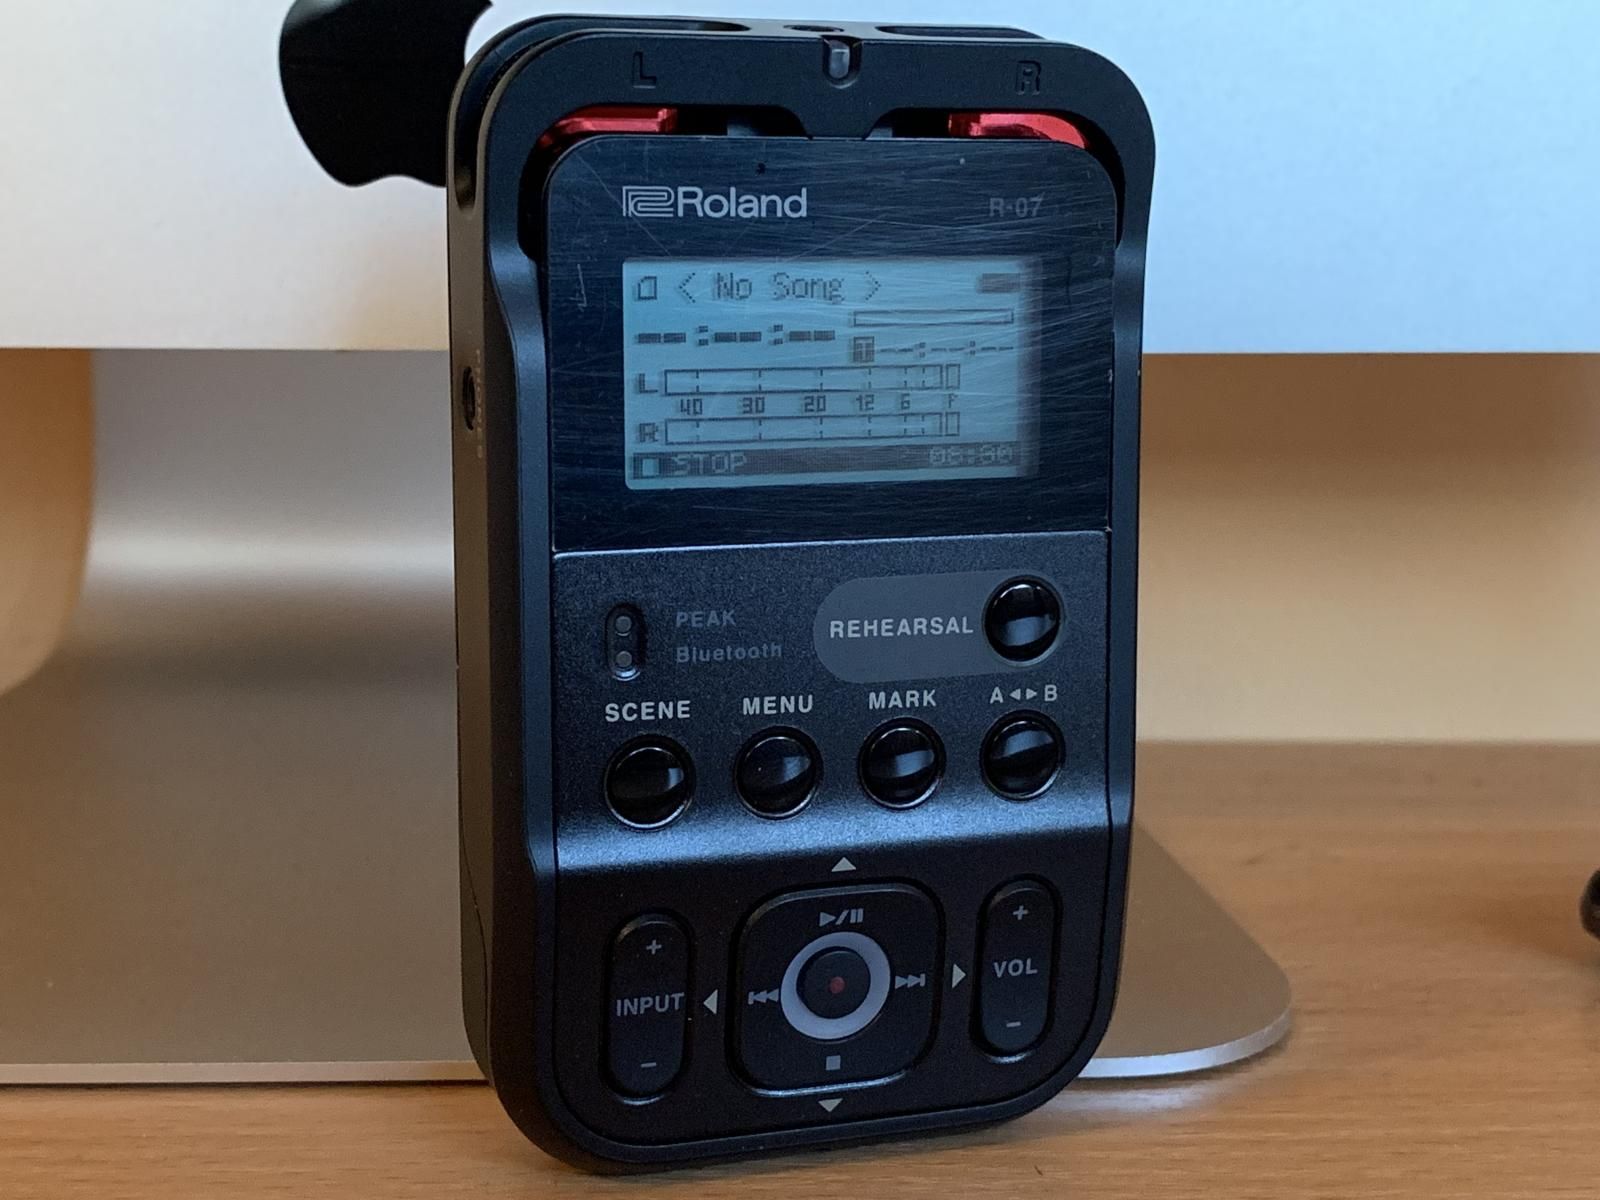 Roland R-07 review: a small but powerful high-res audio recorder